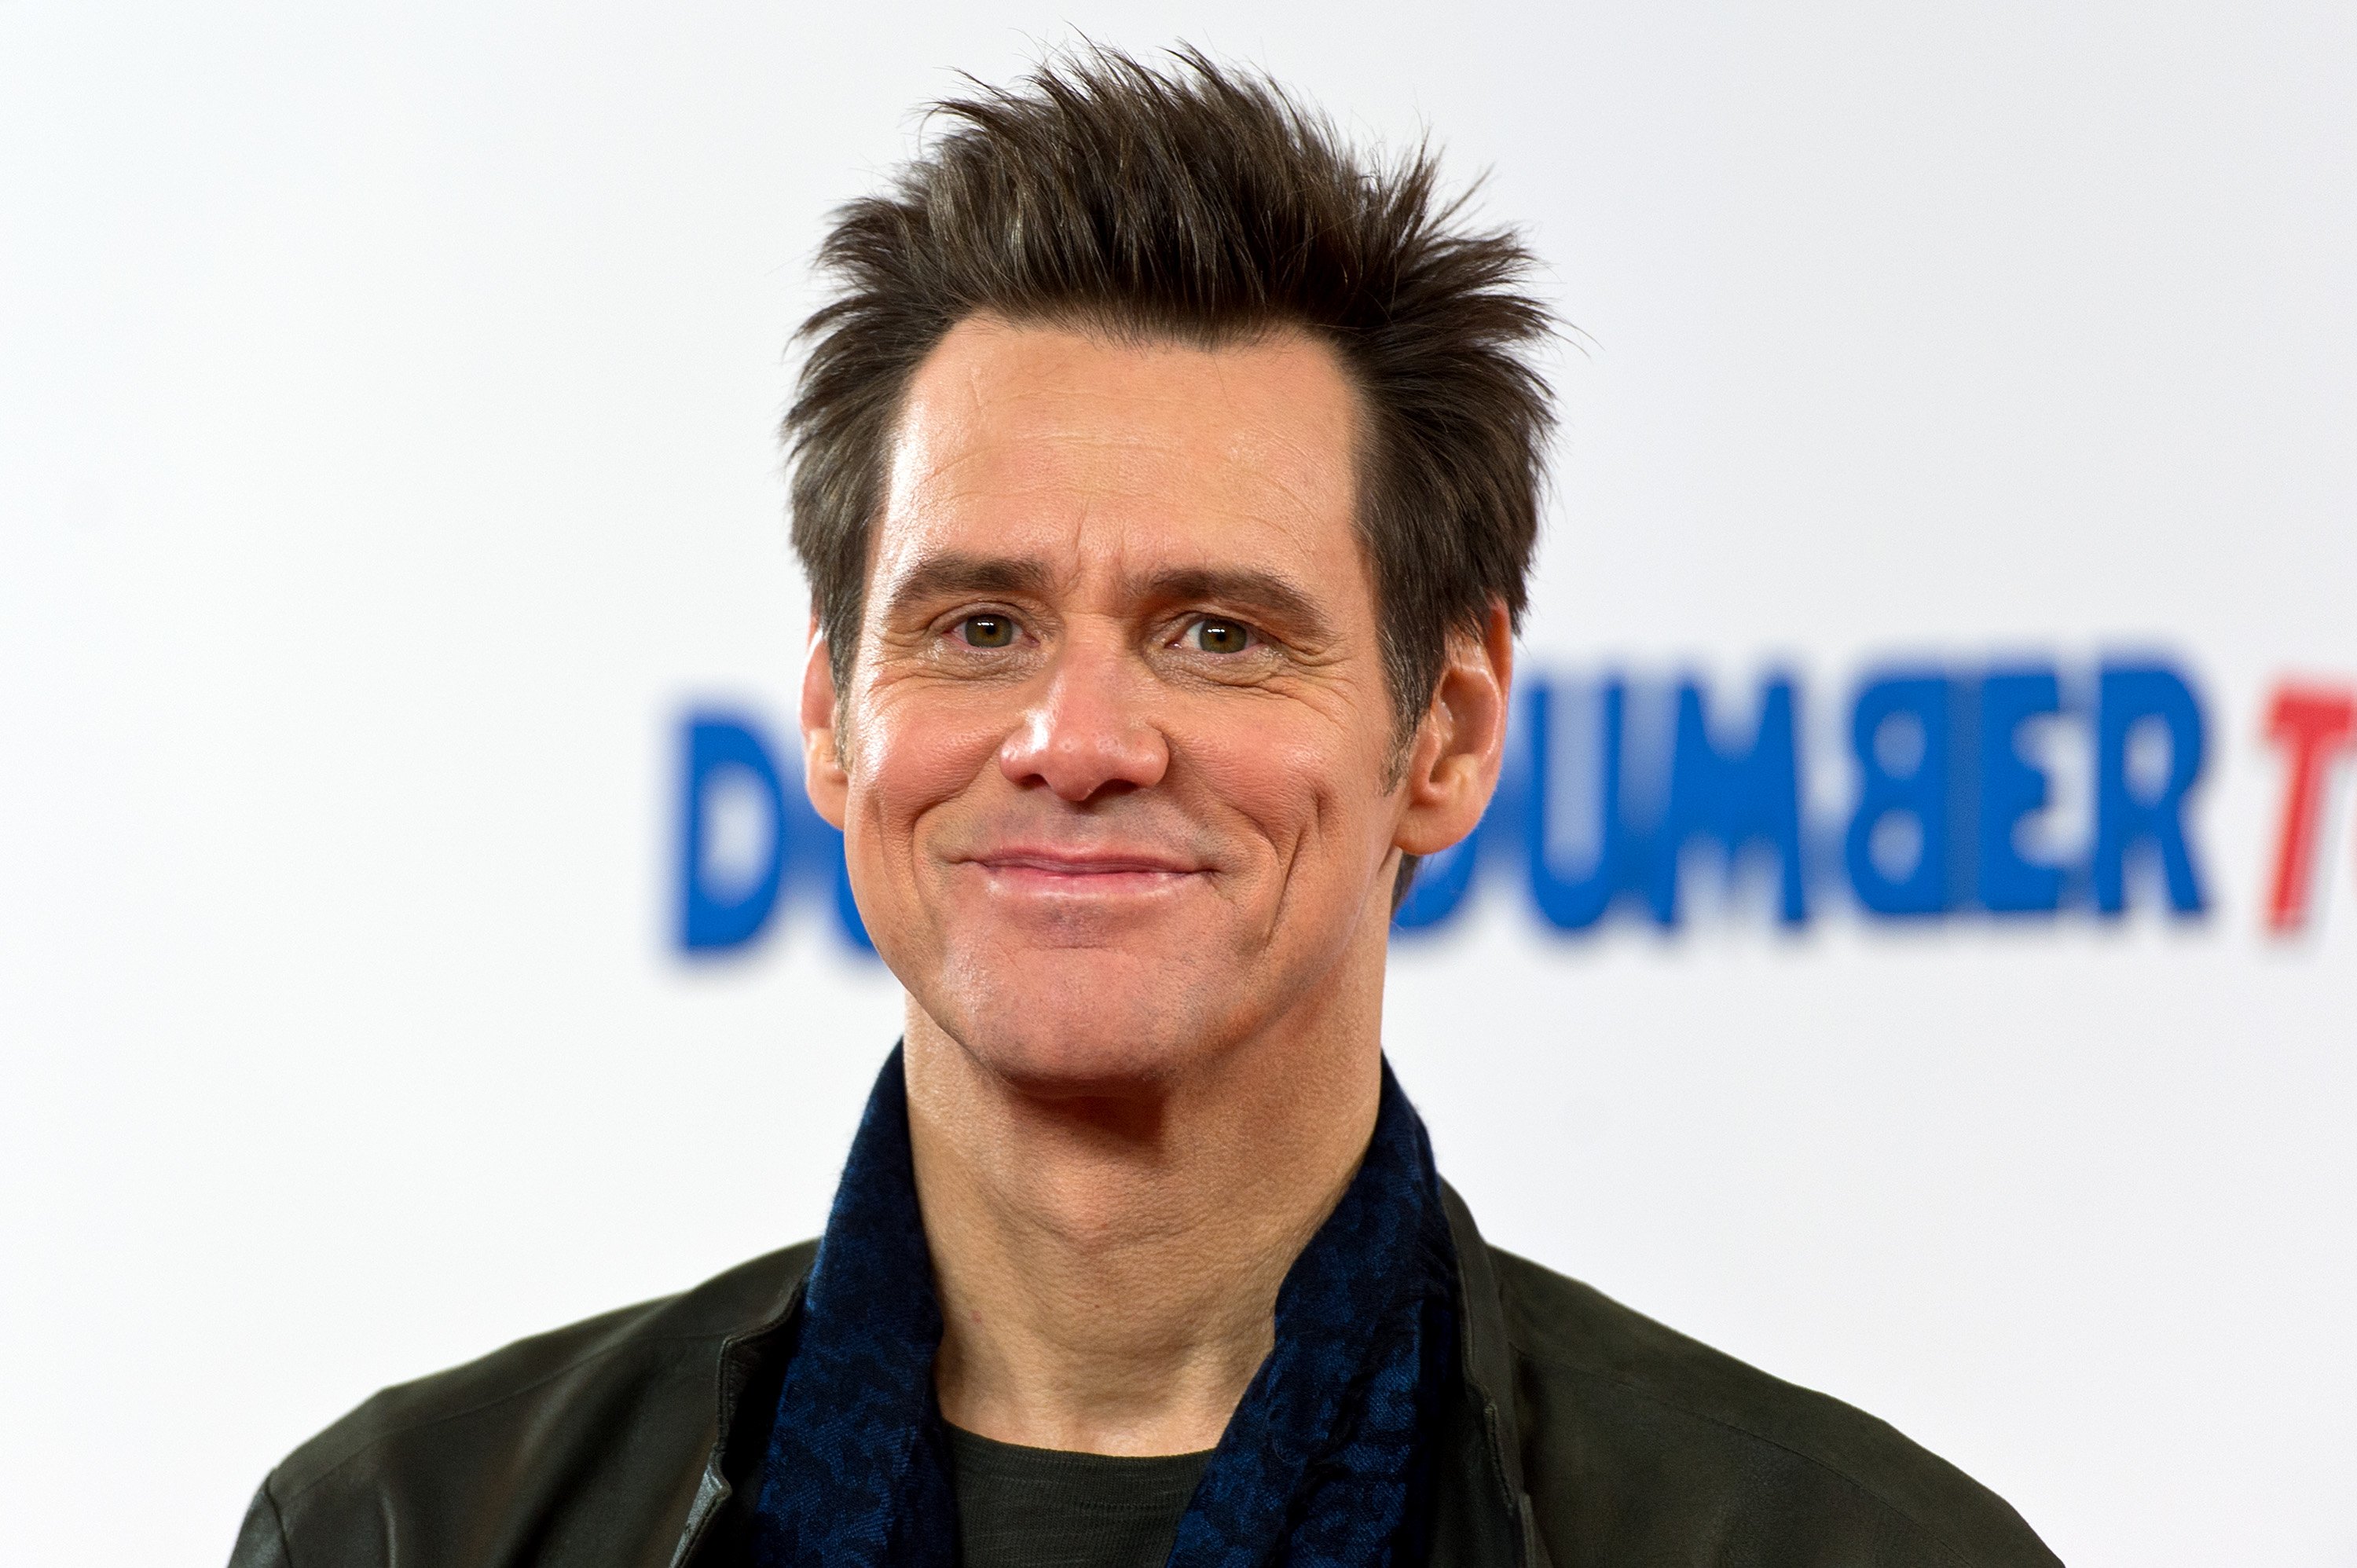 Jim Carrey attends a photocall for 'Dumb and Dumber To' on November 20, 2014 in London